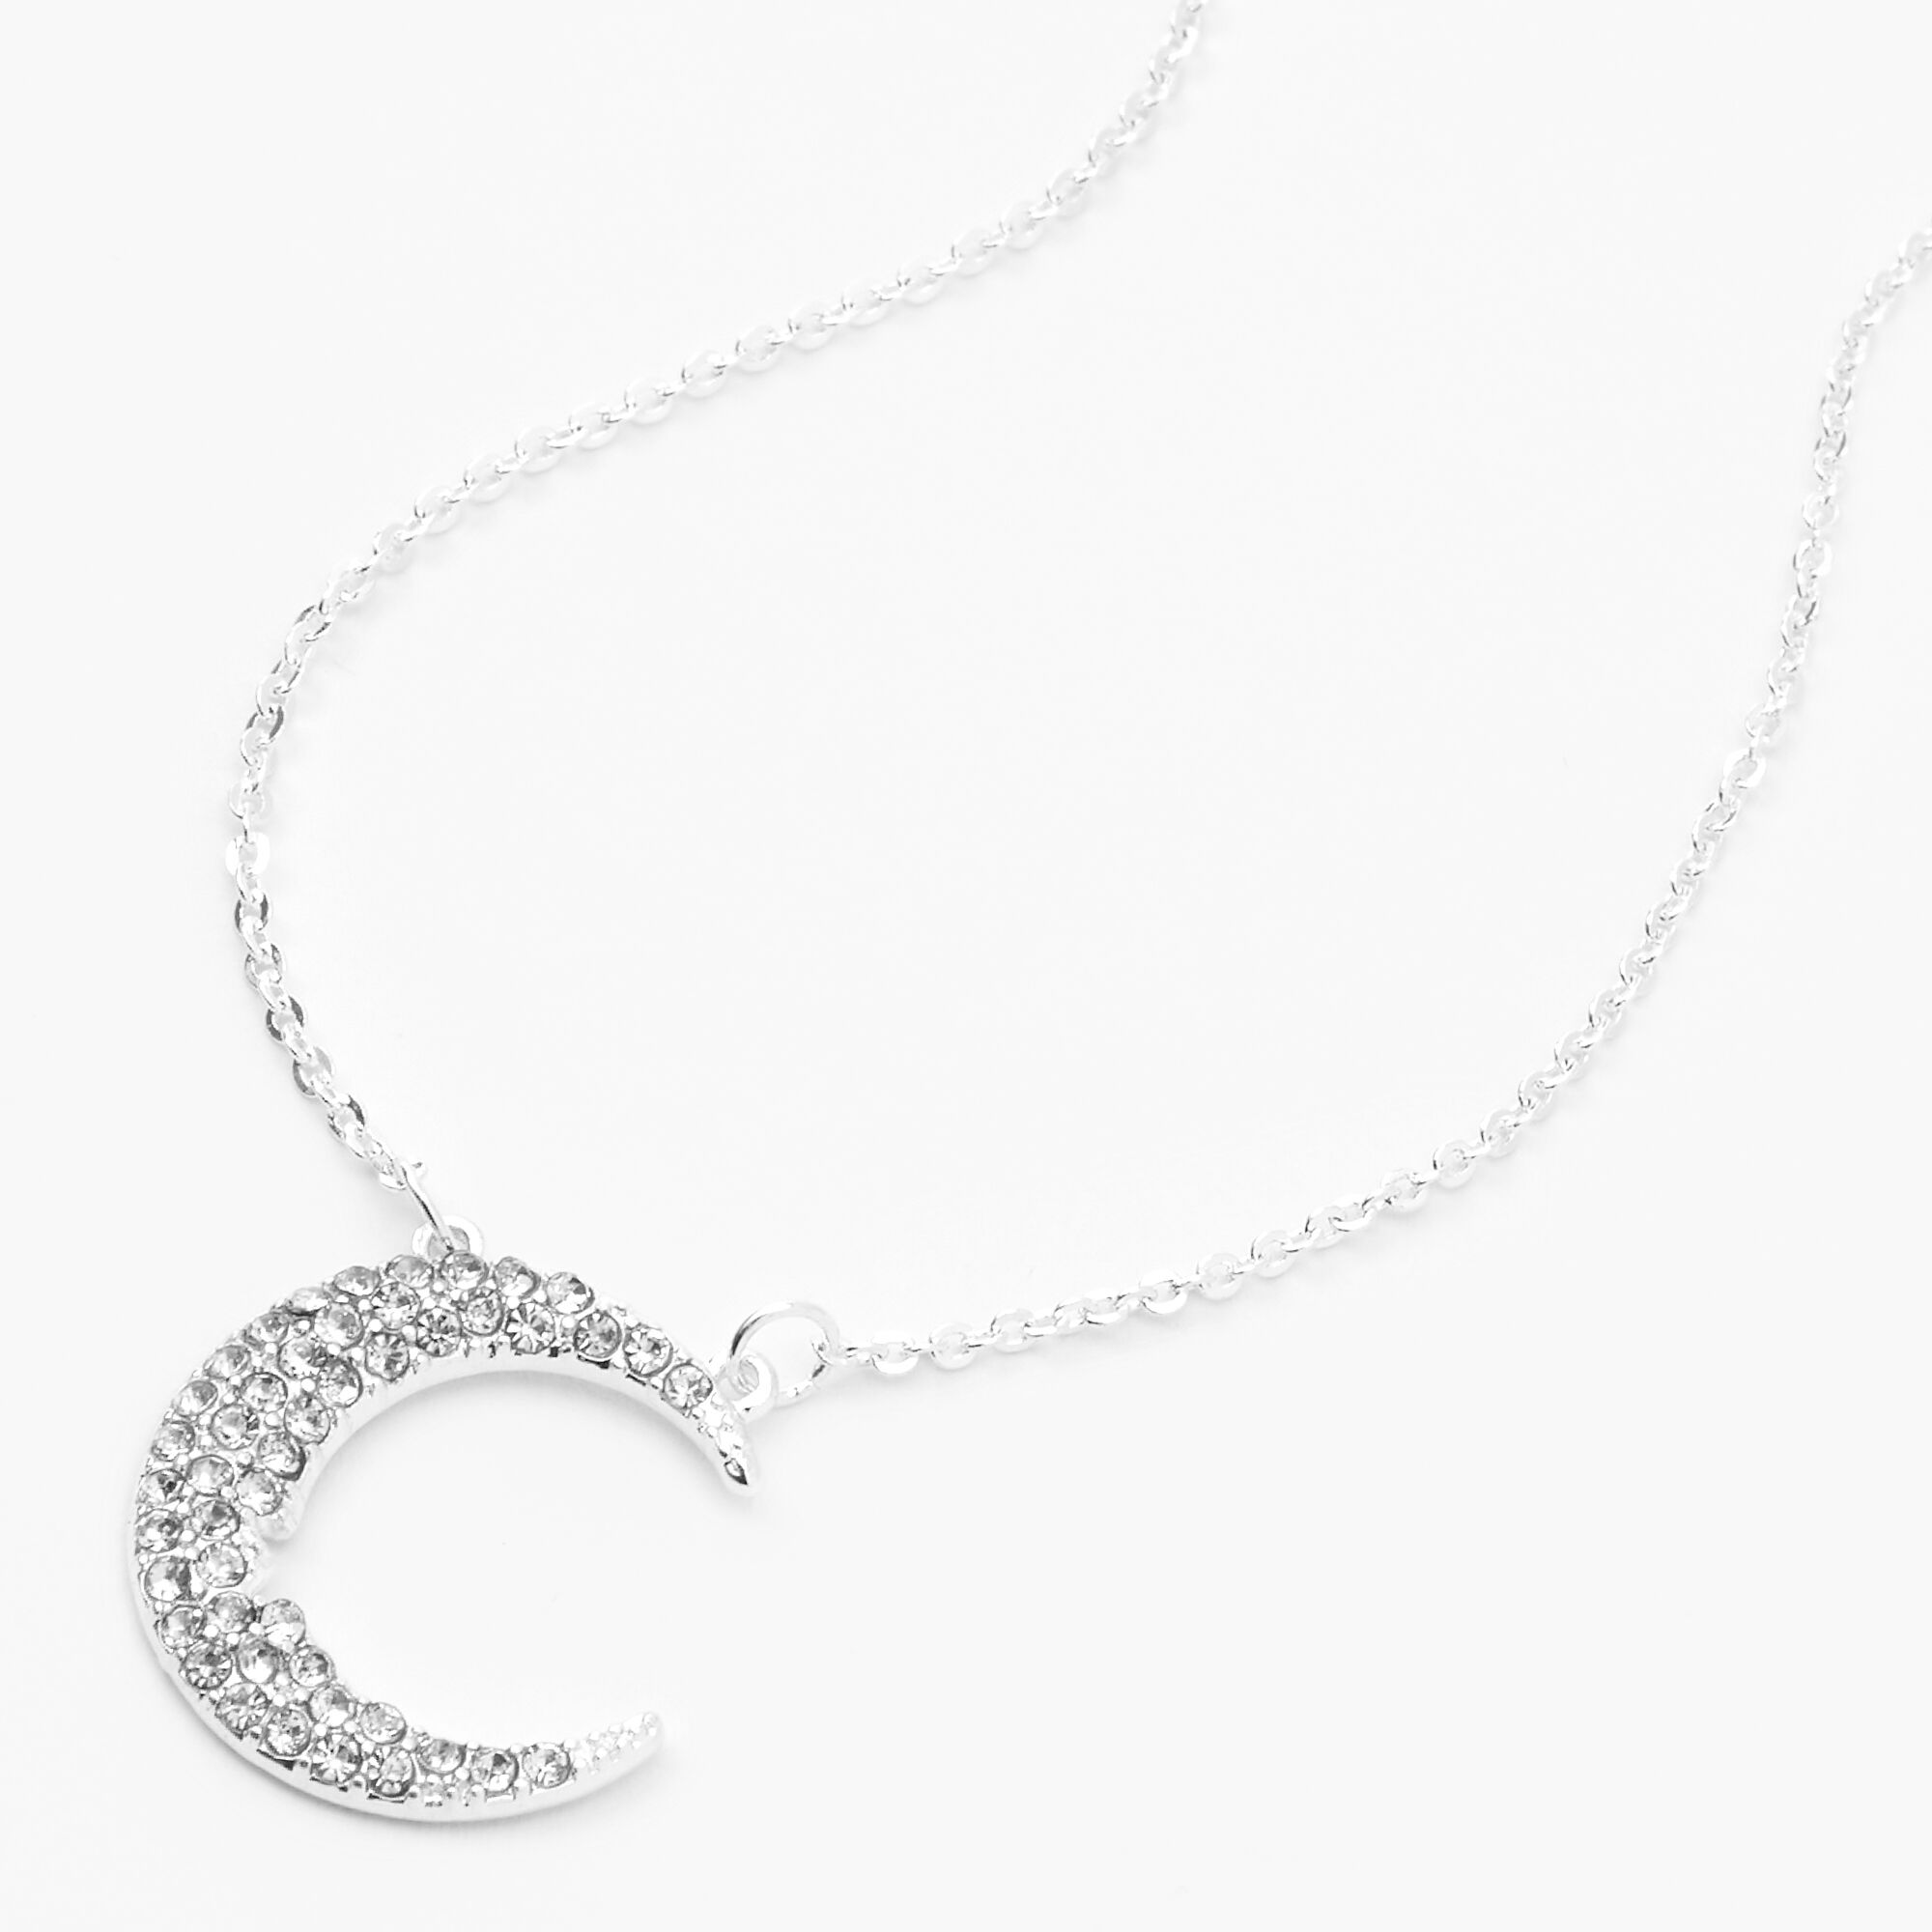 1930s Art Deco Style Jewelry – Costume Jewelry Icing Silver Pave Crescent Moon Pendant Necklace $12.99 AT vintagedancer.com